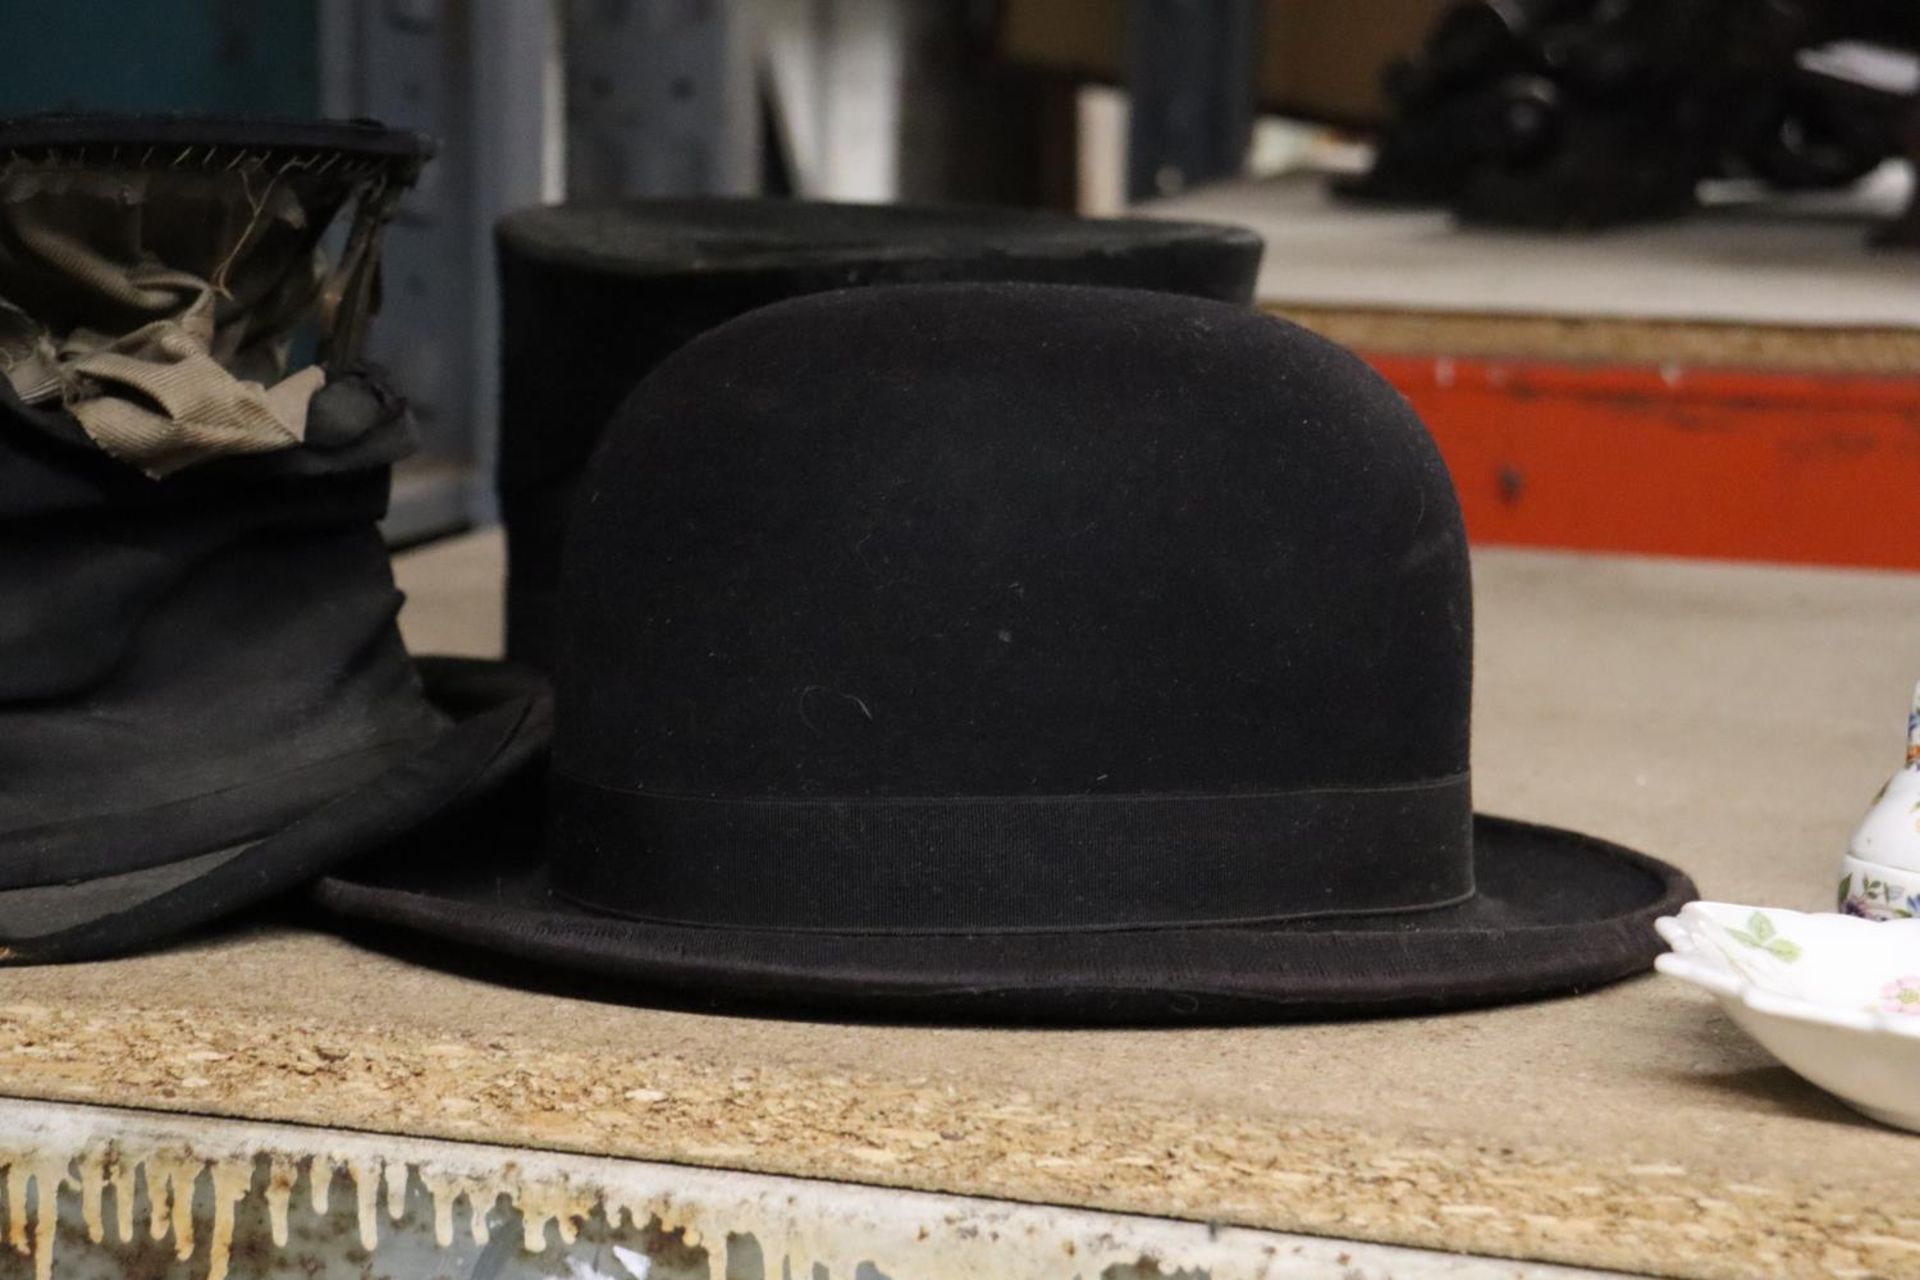 TWO VINTAGE TOP HATS AND A BOWLER HAT - TOP HATS A/F - Bild 3 aus 6